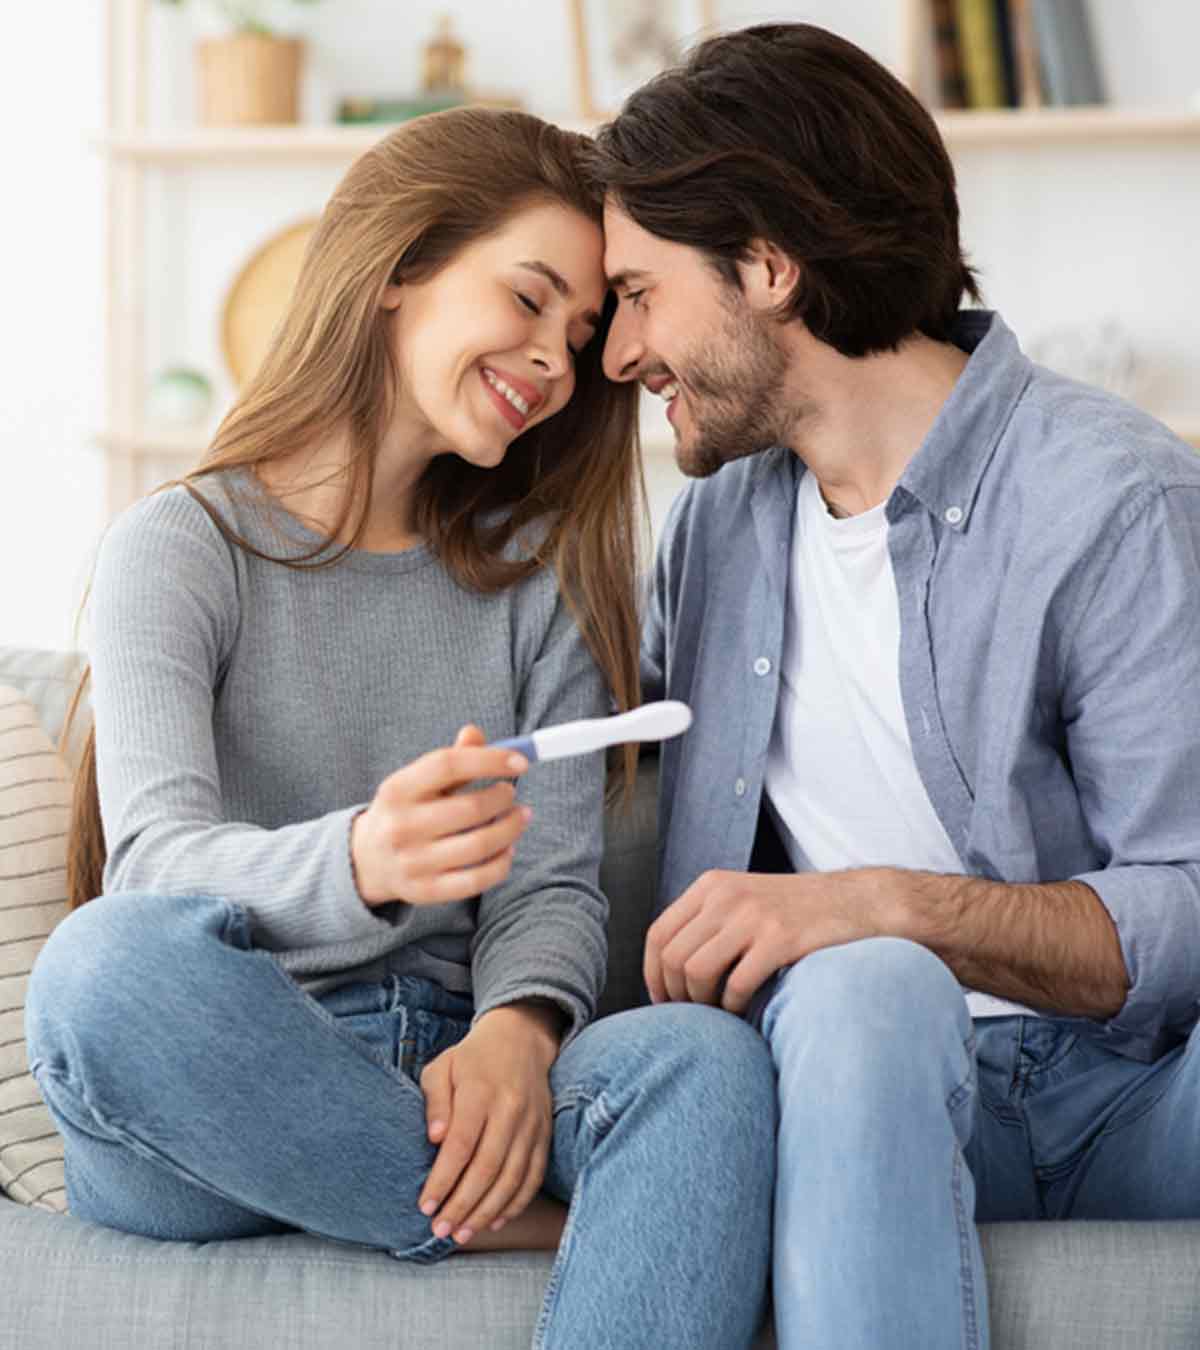 Family Planning 101: 7 Things You Should Invest In